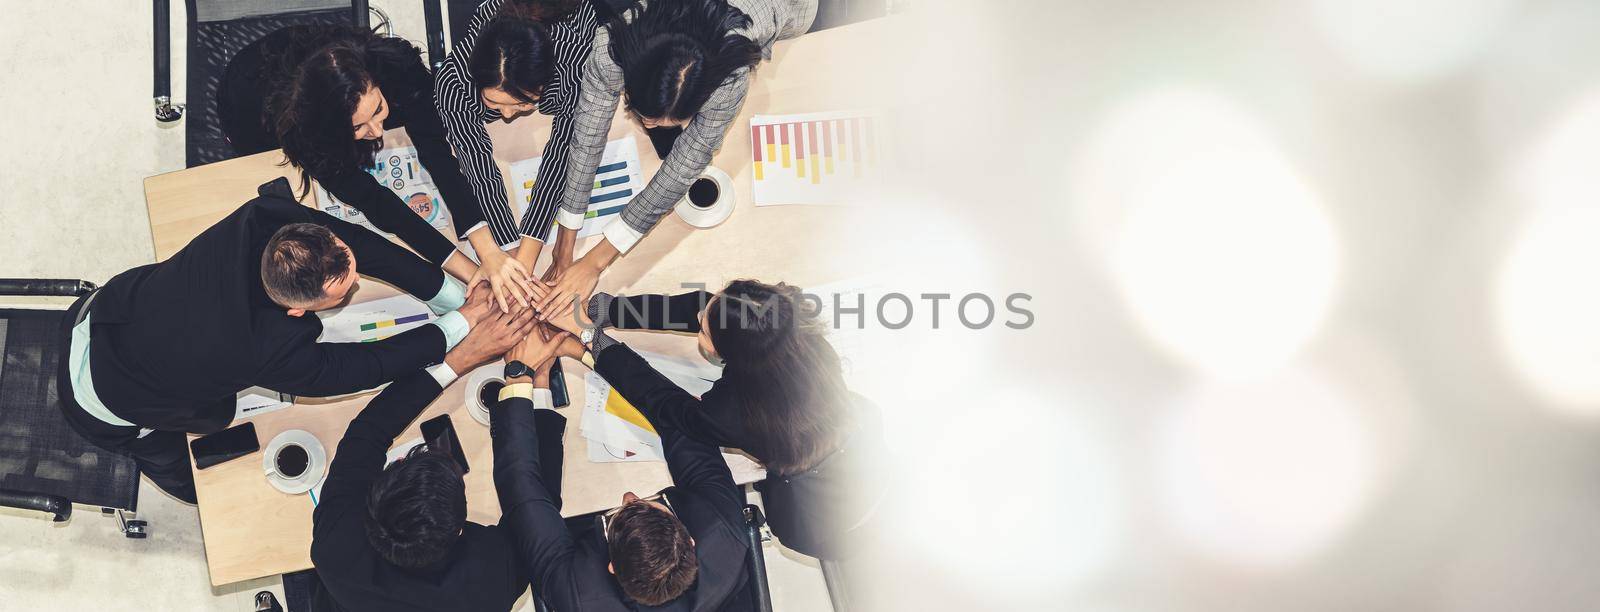 Happy business people celebrate teamwork success together with joy at office table shot from top view . Young businessman and businesswoman workers express cheerful victory in broaden view .